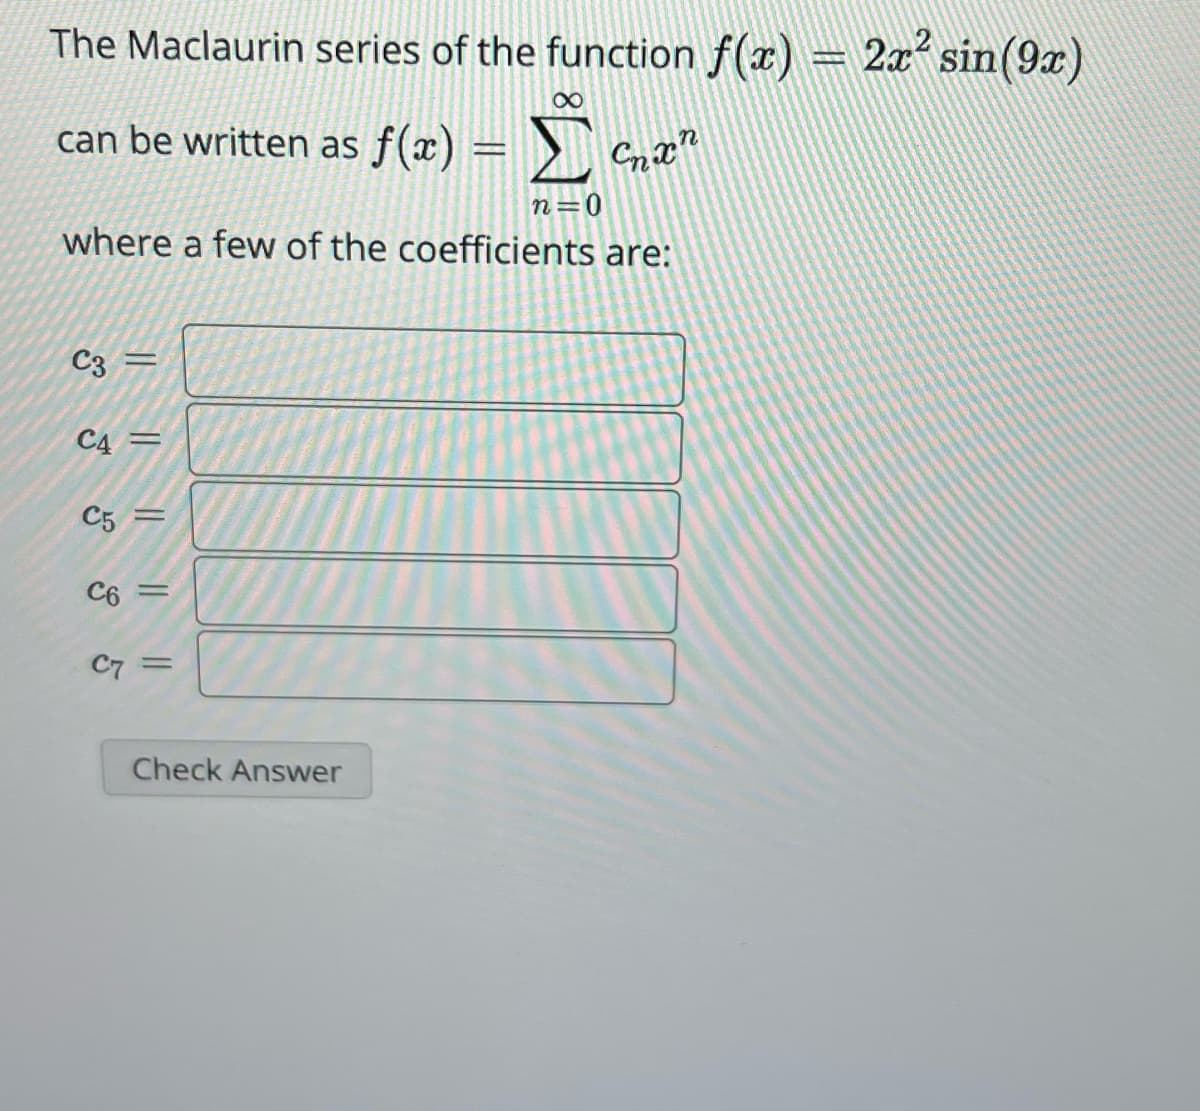 The Maclaurin series of the function f(x) = 2x² sin(9x)
∞
can be written as f(x)
M
=Σ Chan
n=0
where a few of the coefficients are:
C3
C4=
|| || || ||
C5
C6 =
C7
=
Check Answer